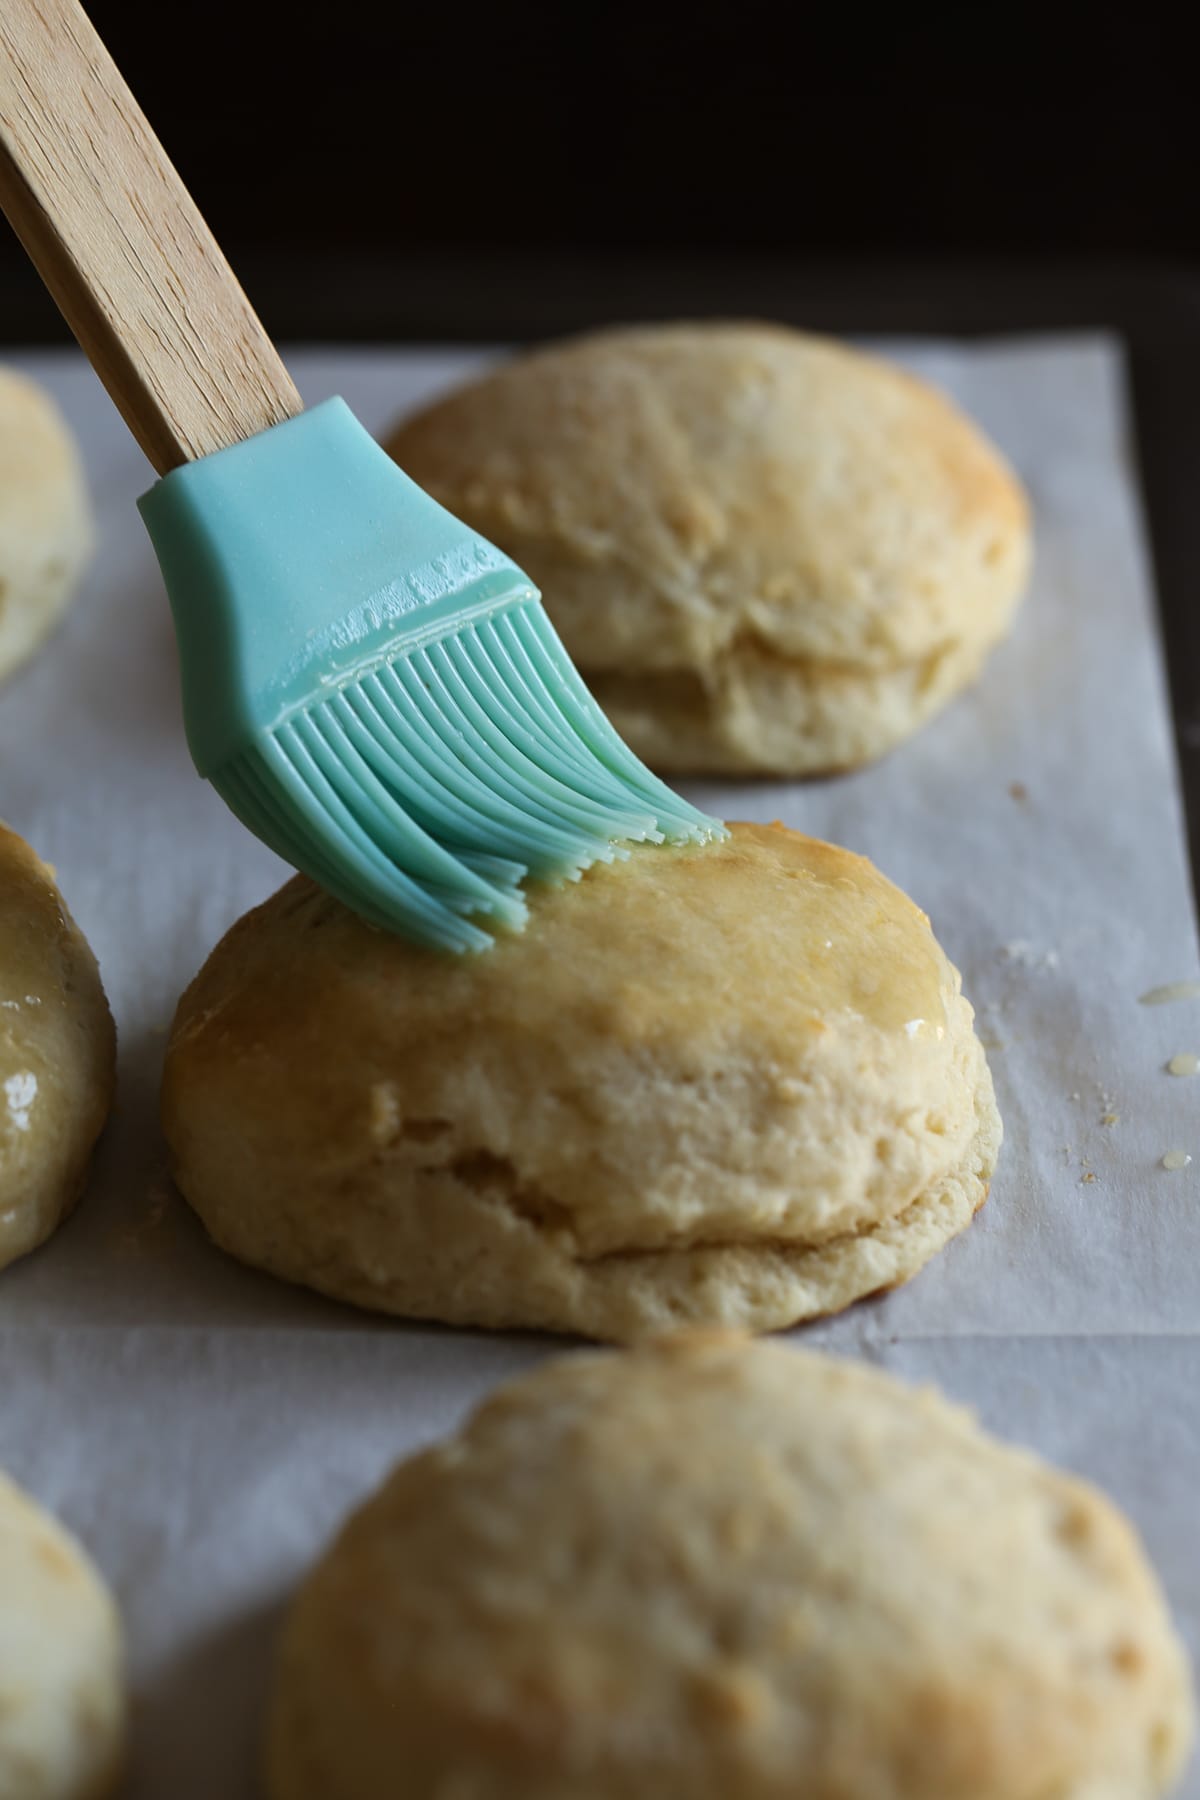 Brushing butter on freshly baked biscuits